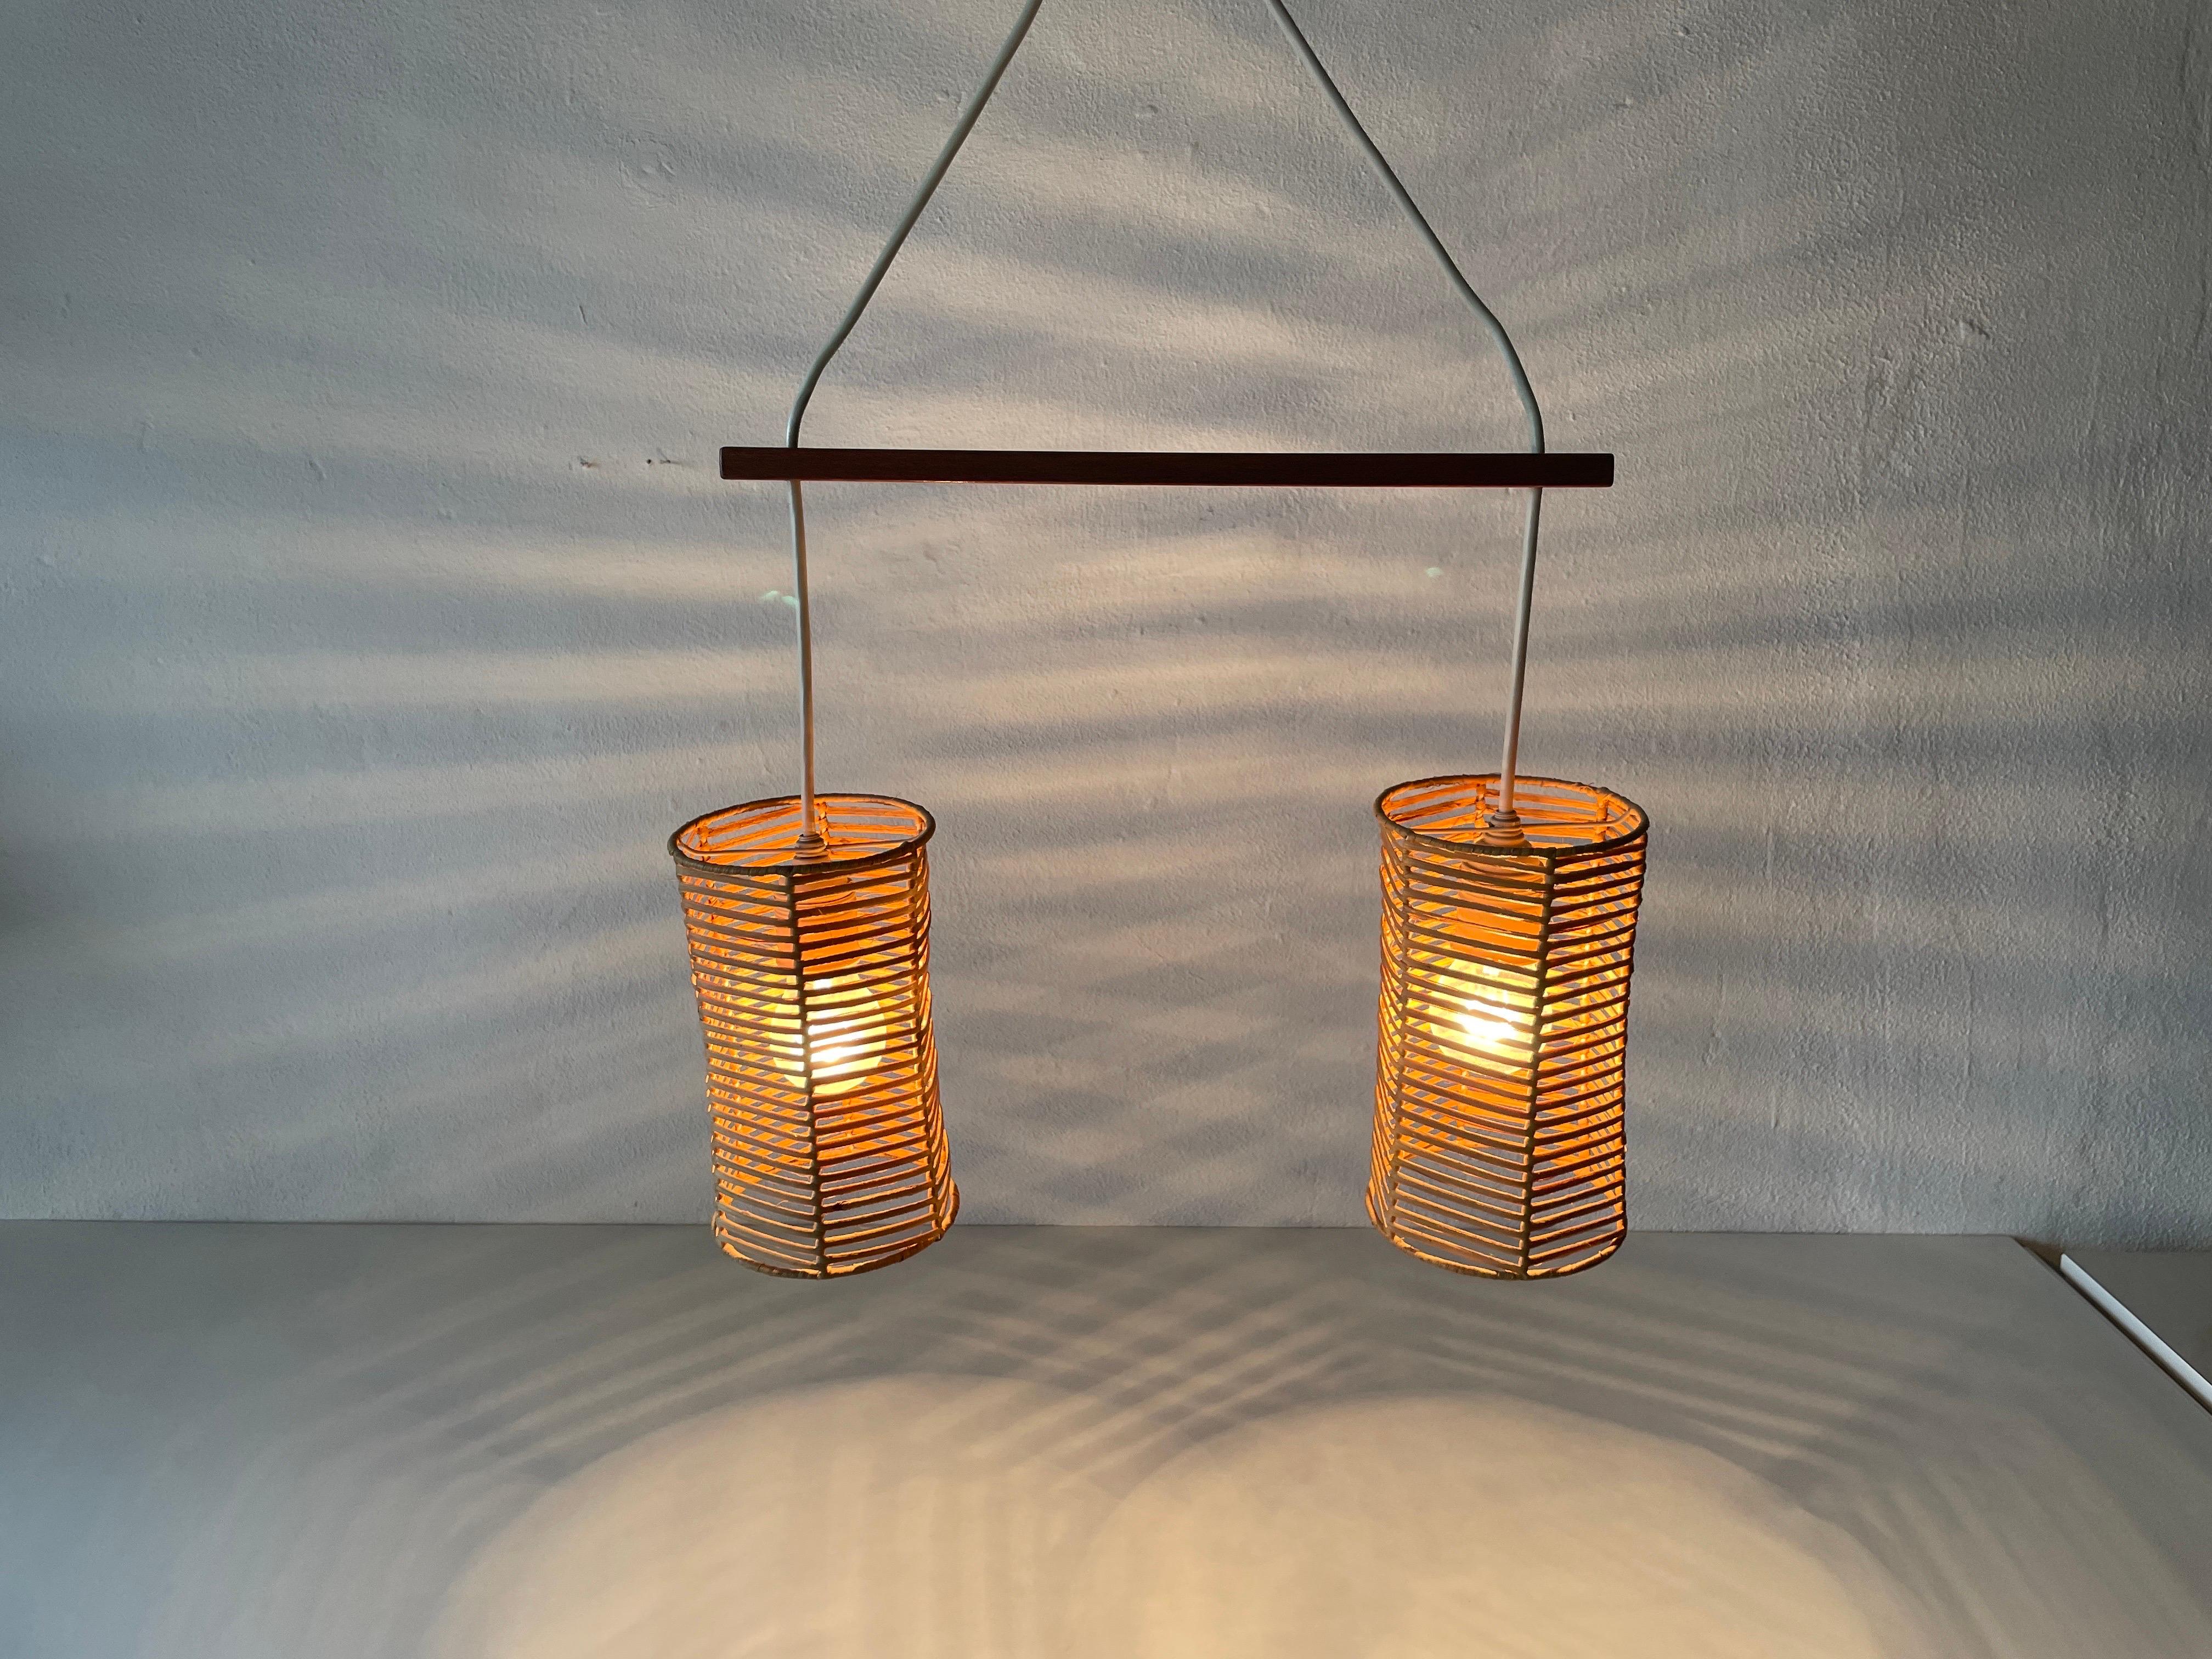 Double Shade Wicker and Wood Pendant Lamp, 1960s, Germany For Sale 5